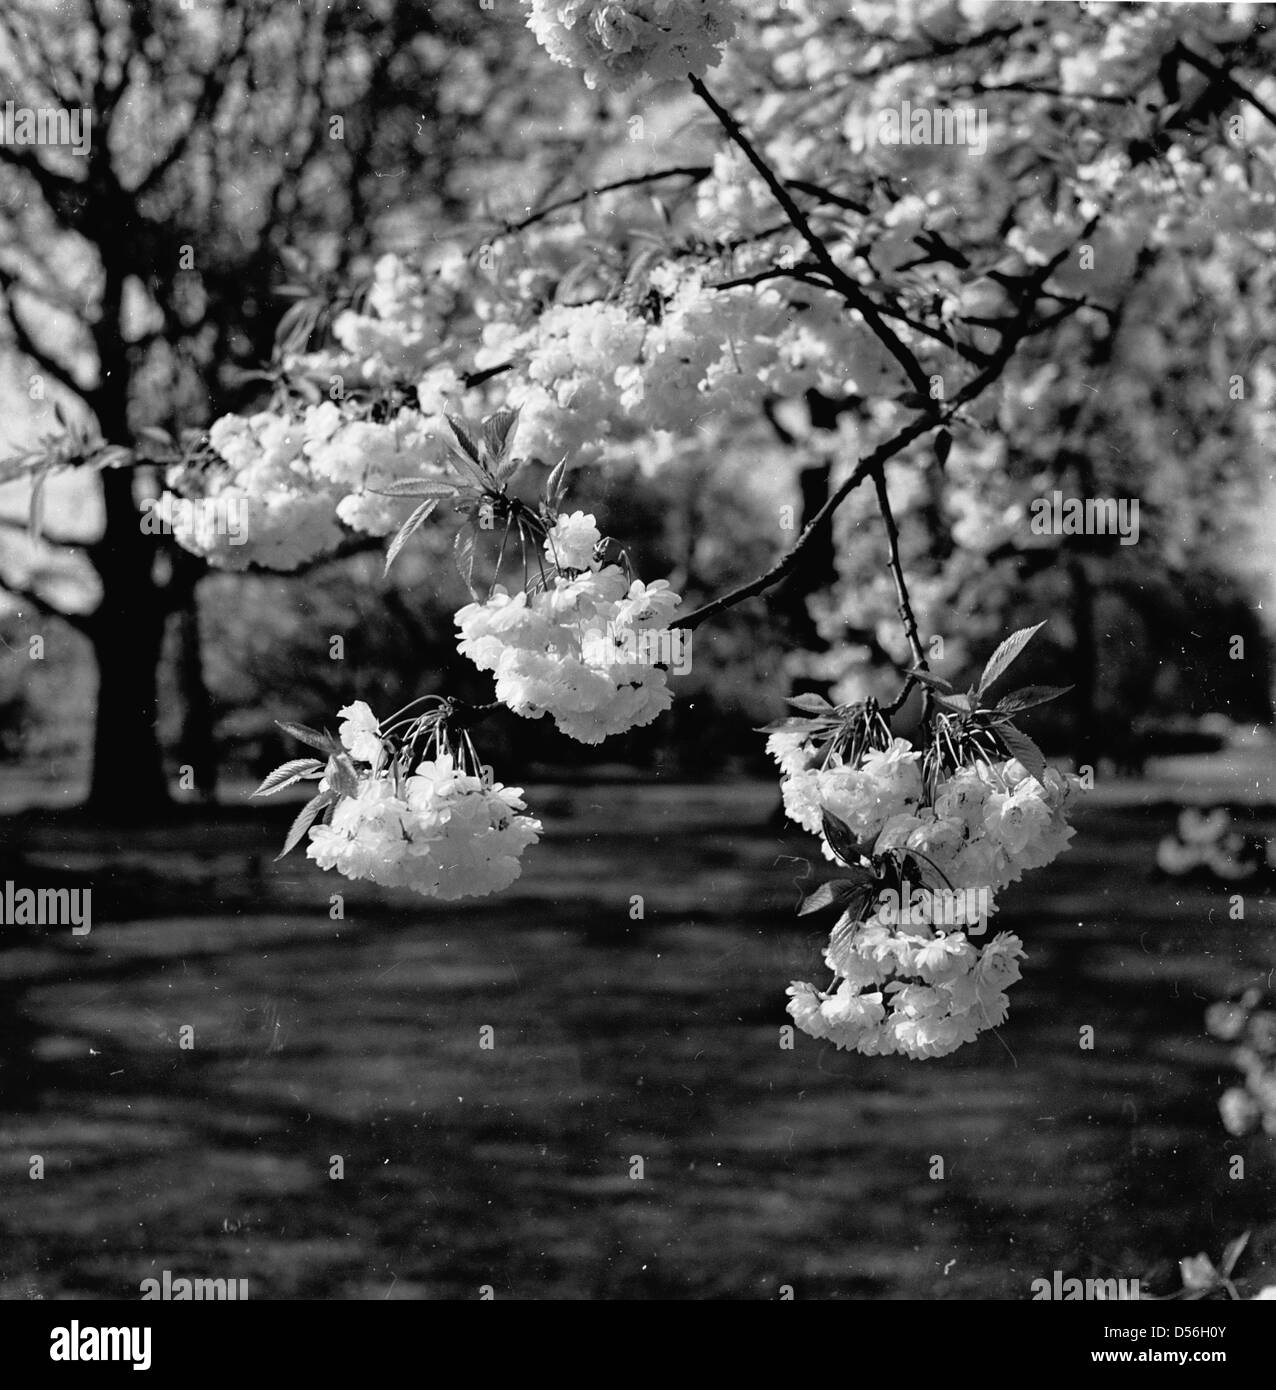 Historical 1950s. The delightful blossom or flowers on a cherry tree. Stock Photo